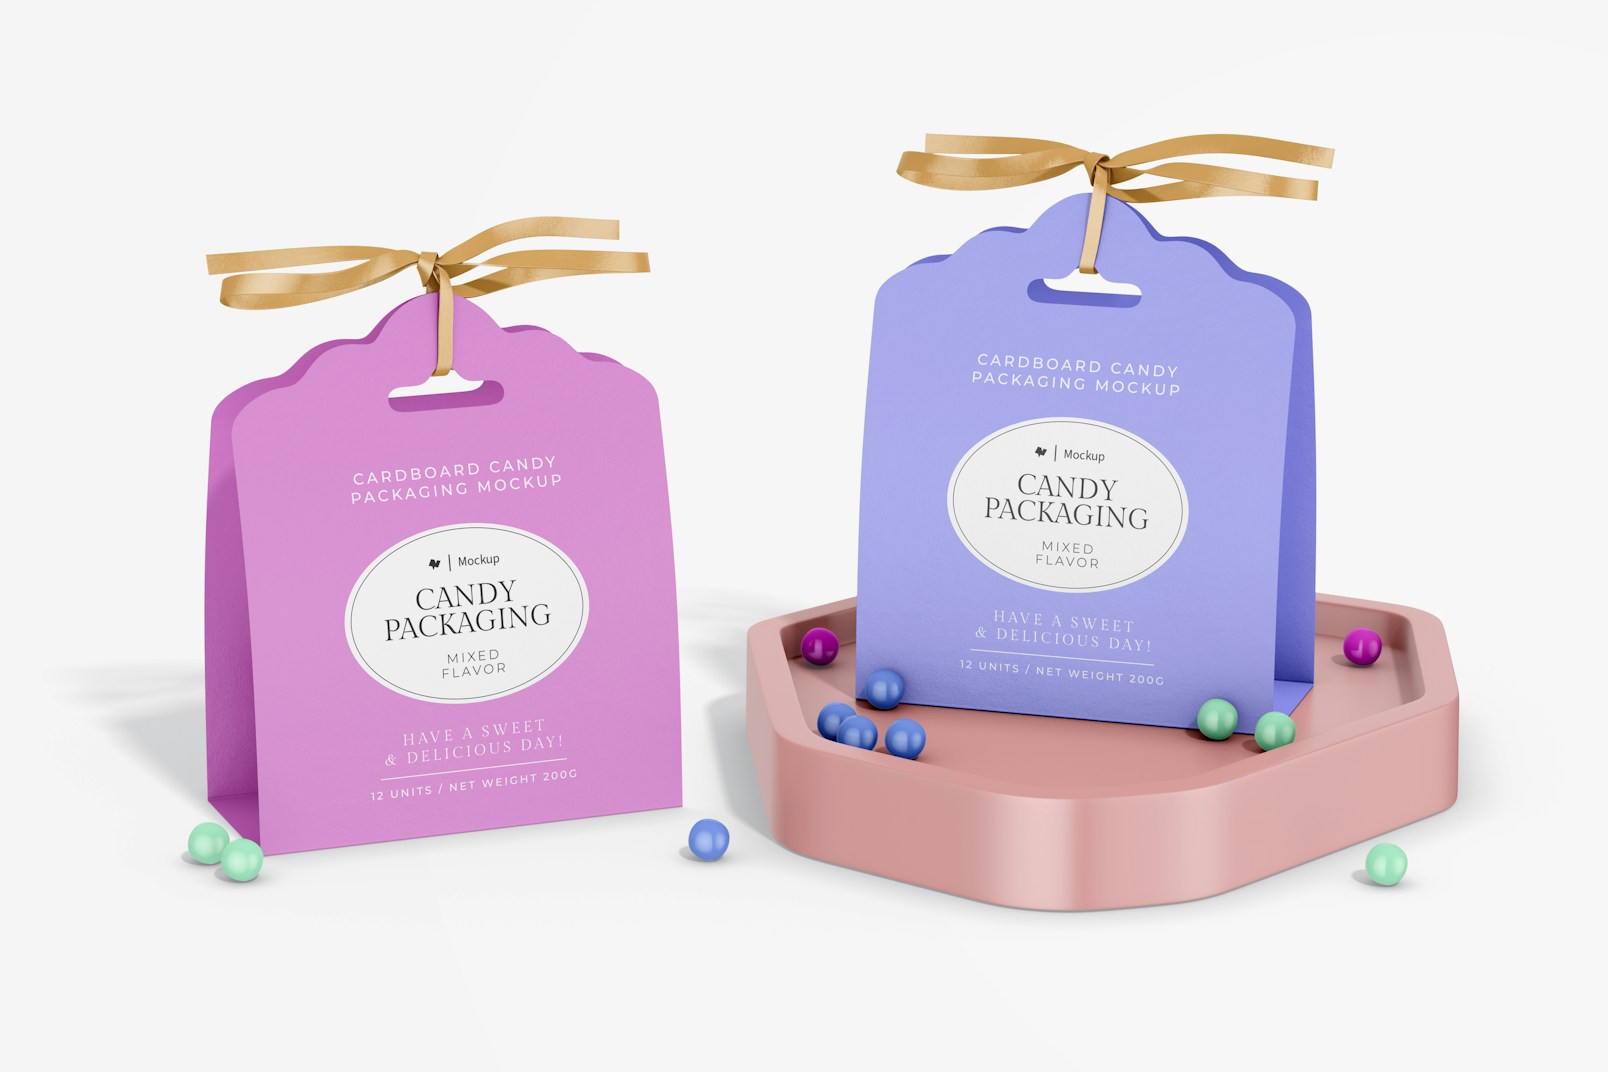 Cardboard Candy Packaging Mockup, on Podium